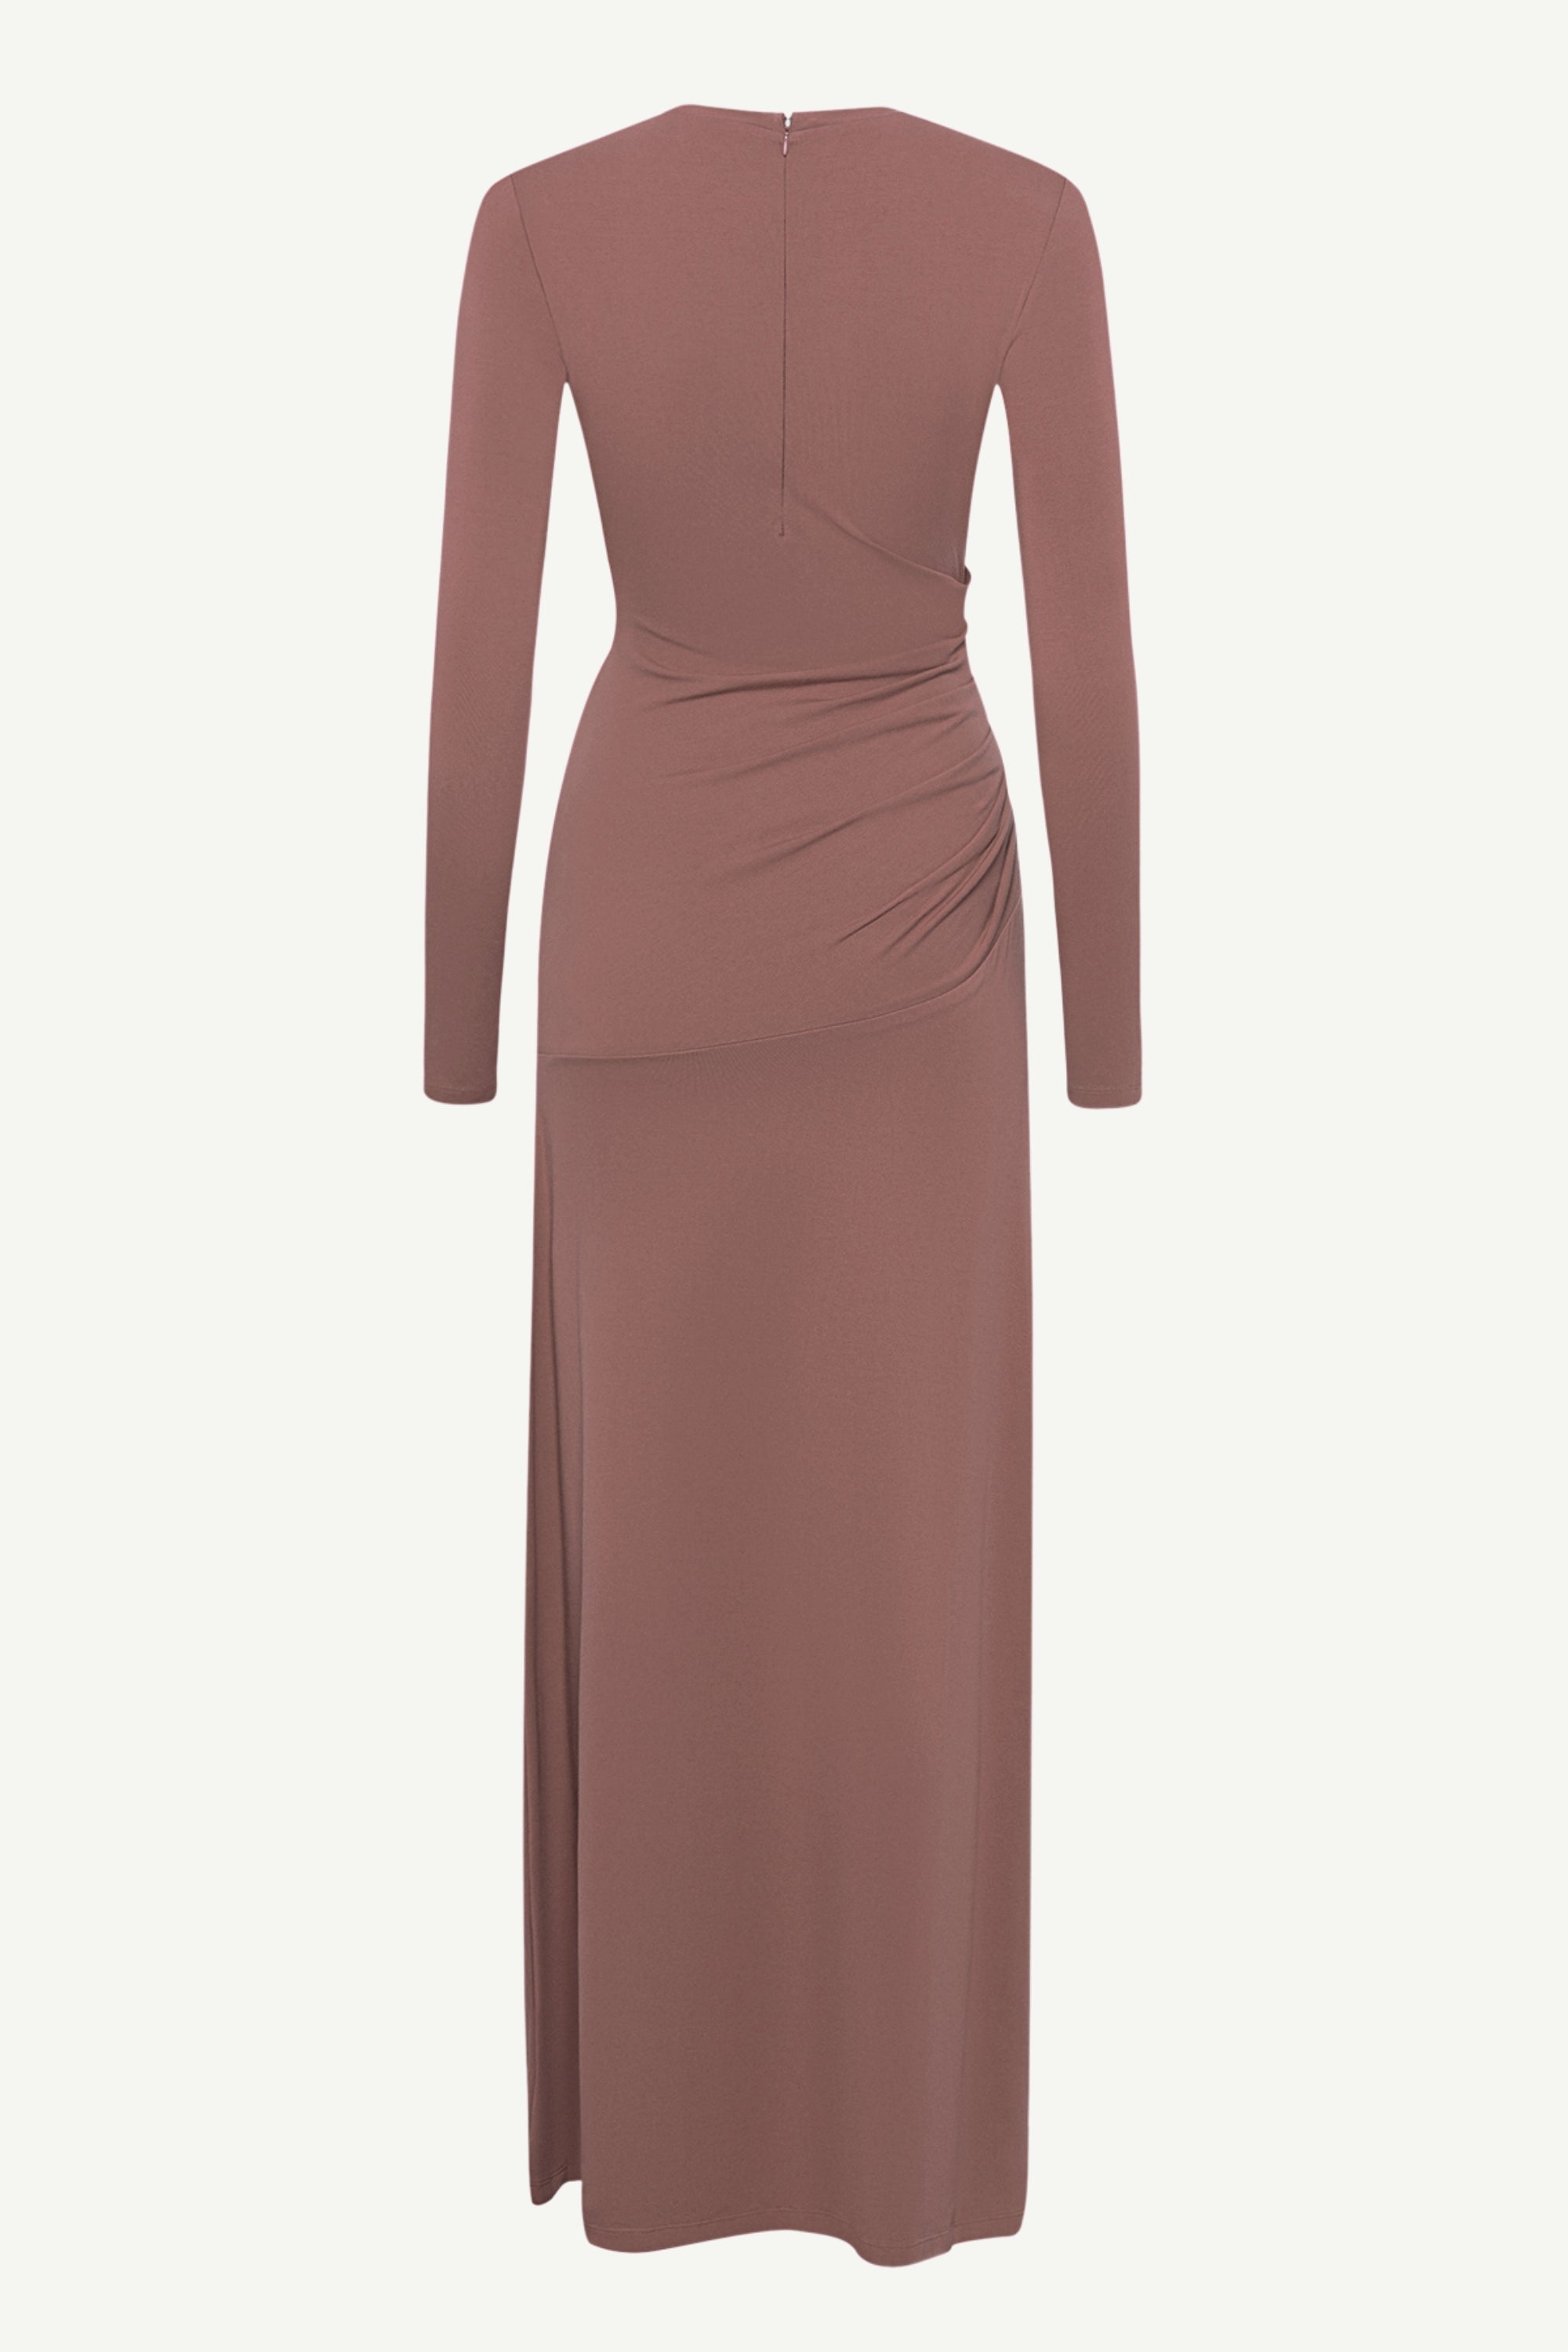 Natalie Rouched Jersey Maxi Dress - Deep Taupe Clothing Veiled 